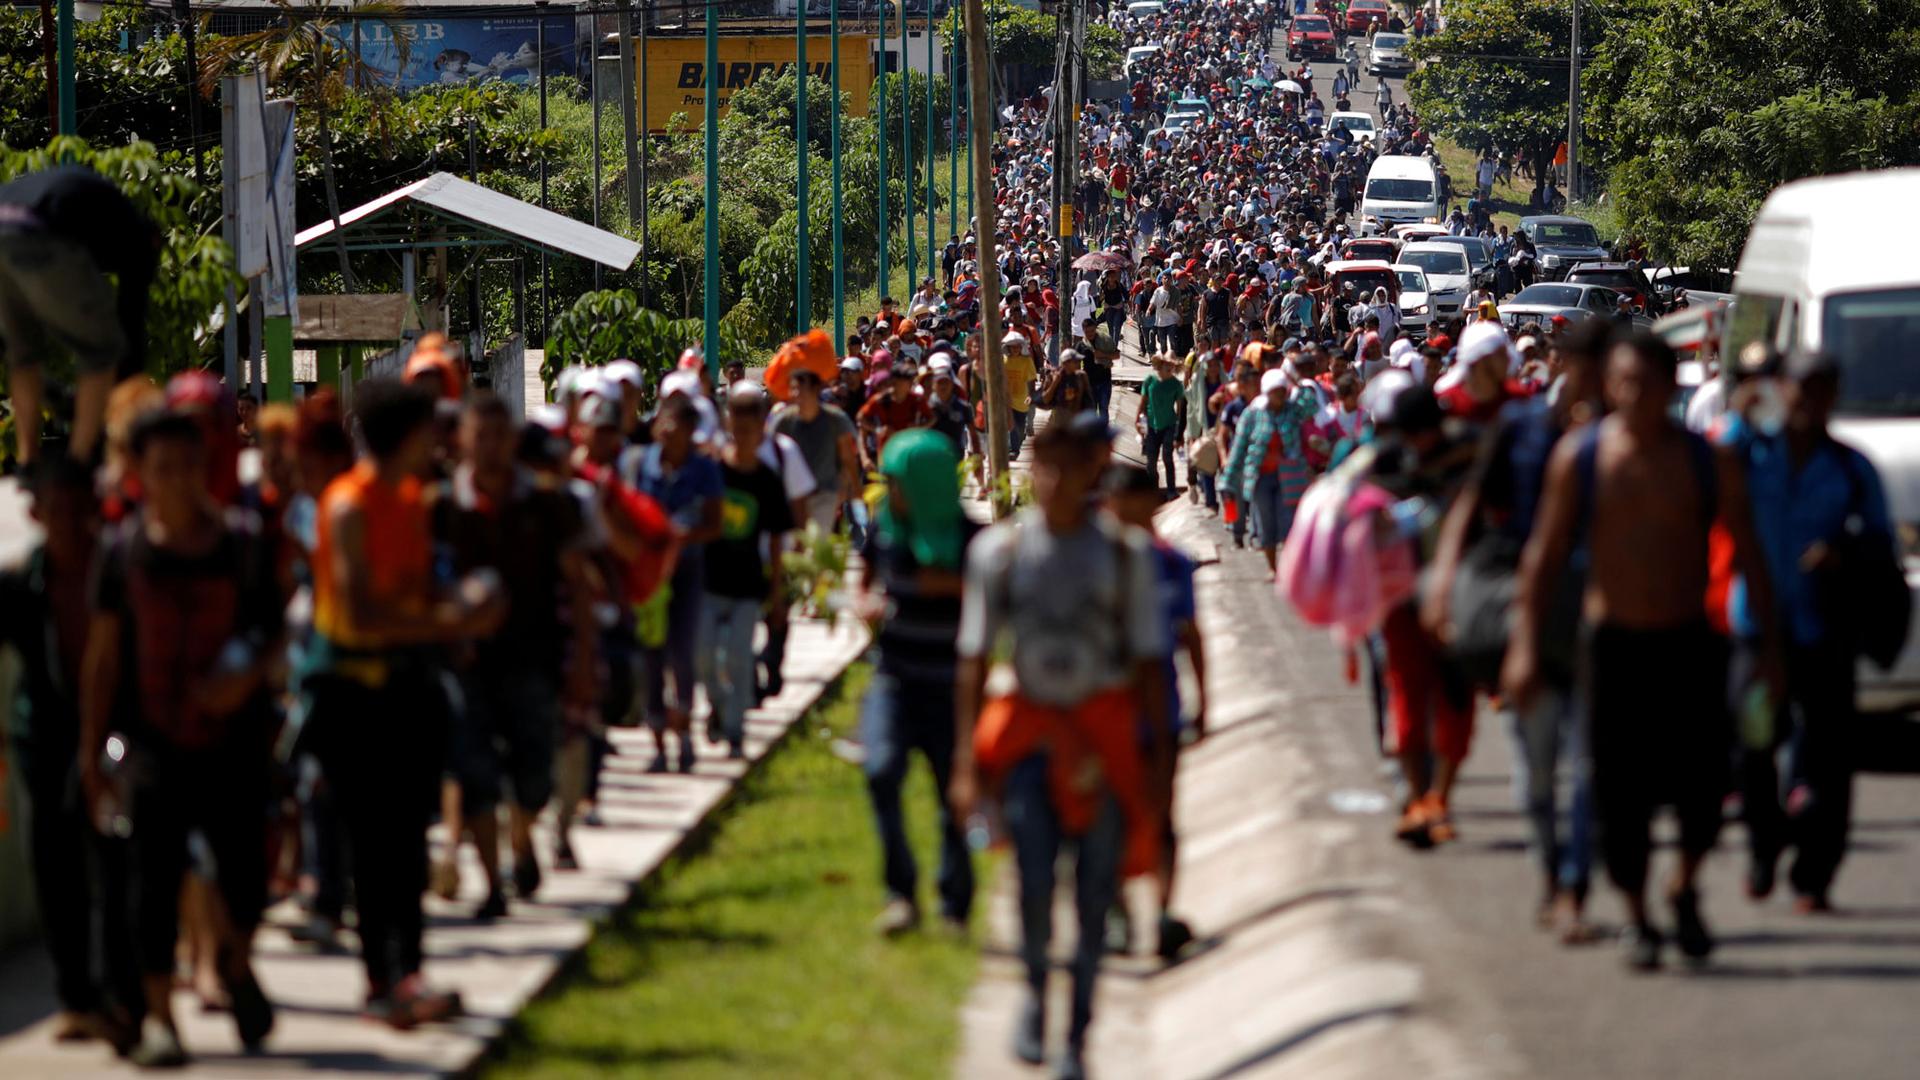 Central American migrants are shown walking on a road and sidewalk spreading the length of the highway in frame near the border with Guatemala.